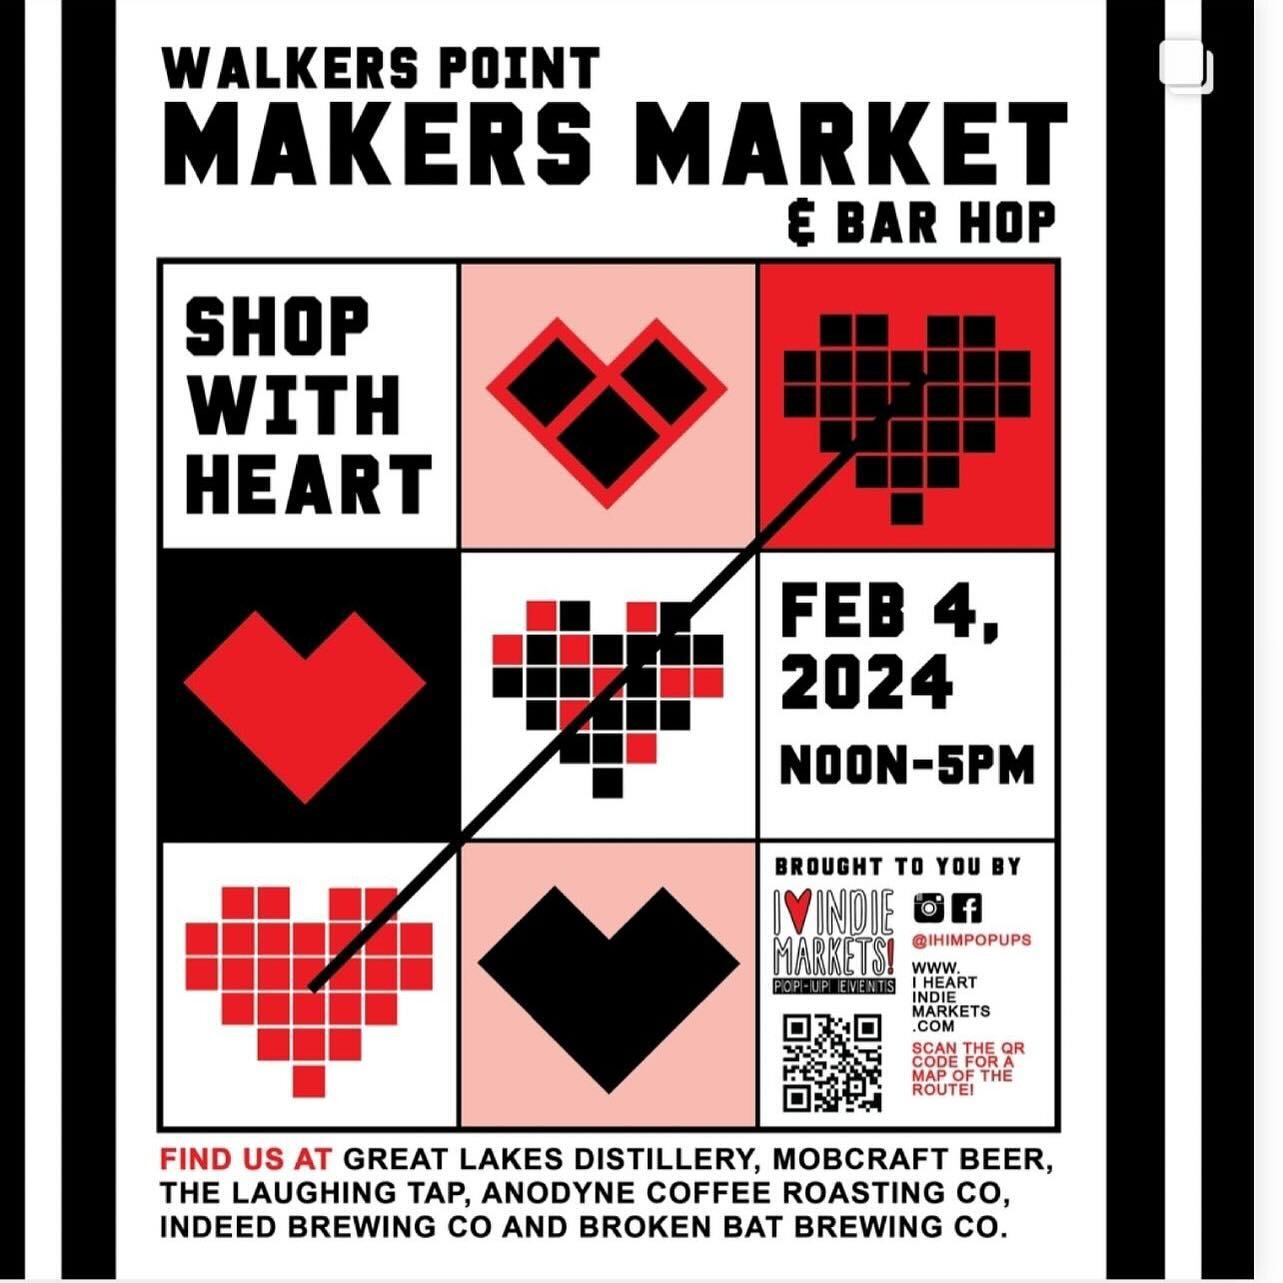 It&rsquo;s been way toooo long since we shared our truffle magic on the scene @mobcraftbeer for the @ihimpopups makers market&hellip;.stoked to return with superfood samples of our out of this world FLAVOR ART!  Be sure to stop by for some positive v